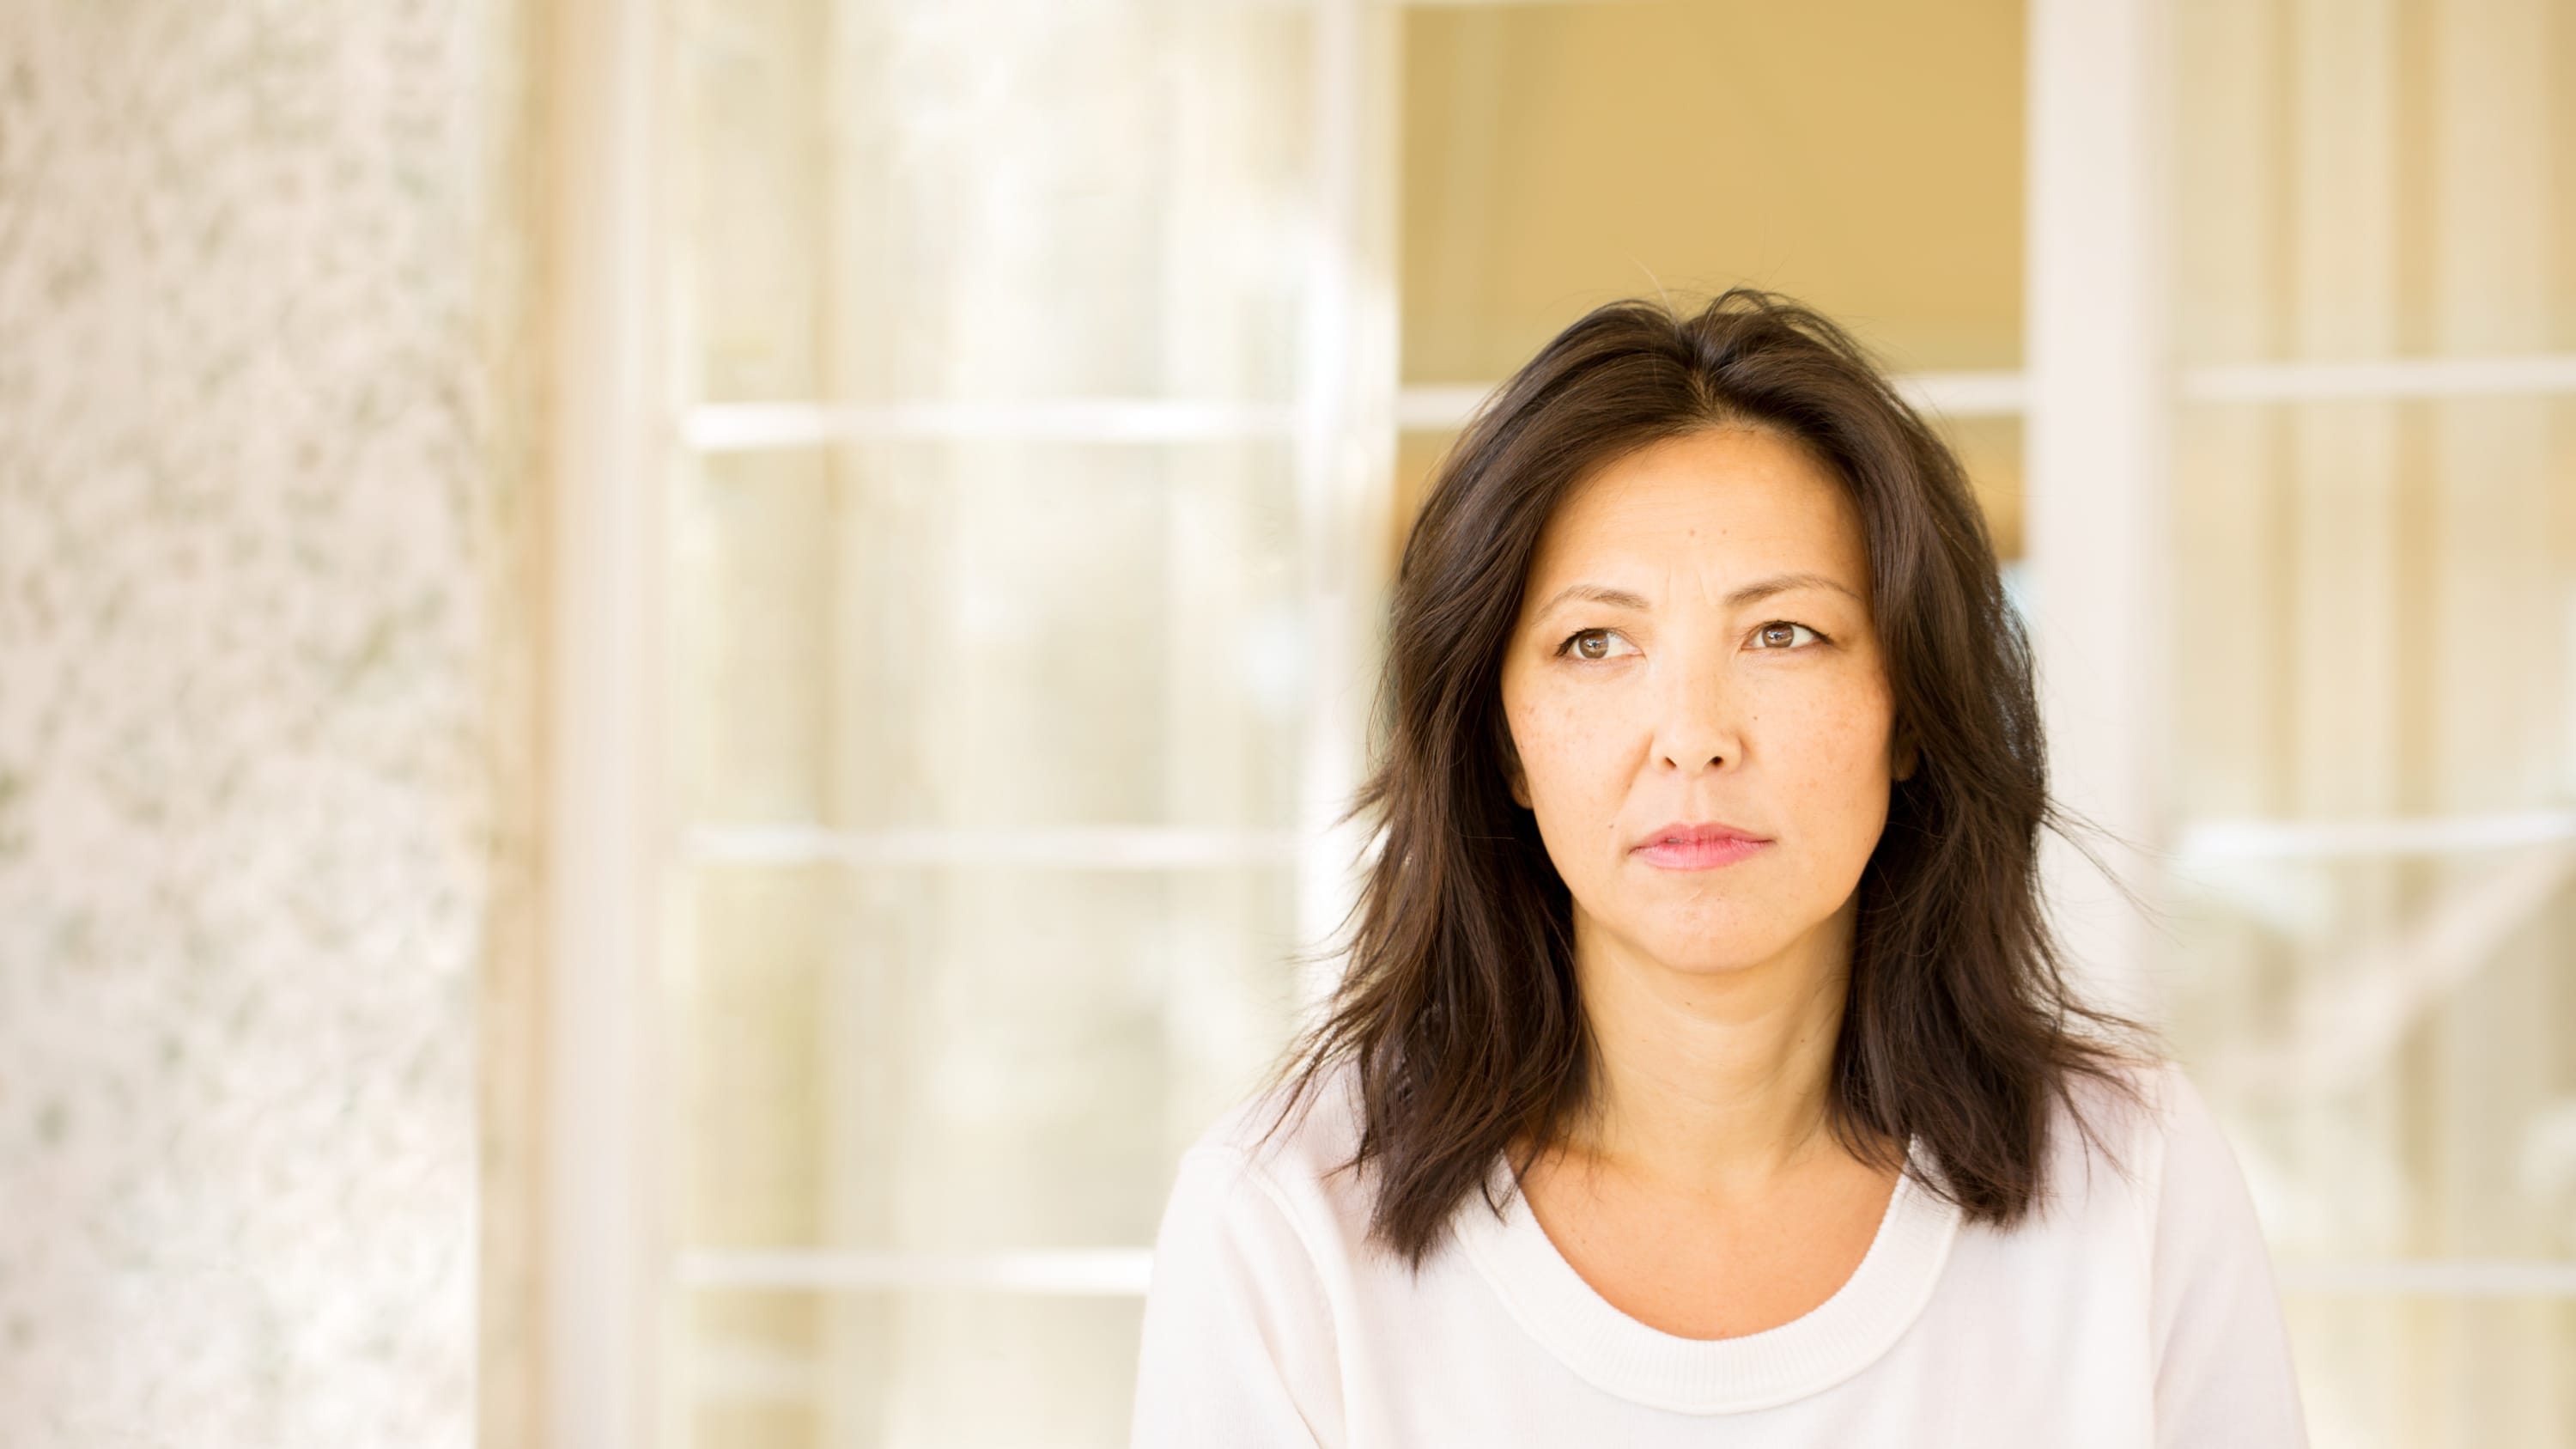 portrait of a woman looking pensive, possibly as a result of receiving a diagnosis of leukemia